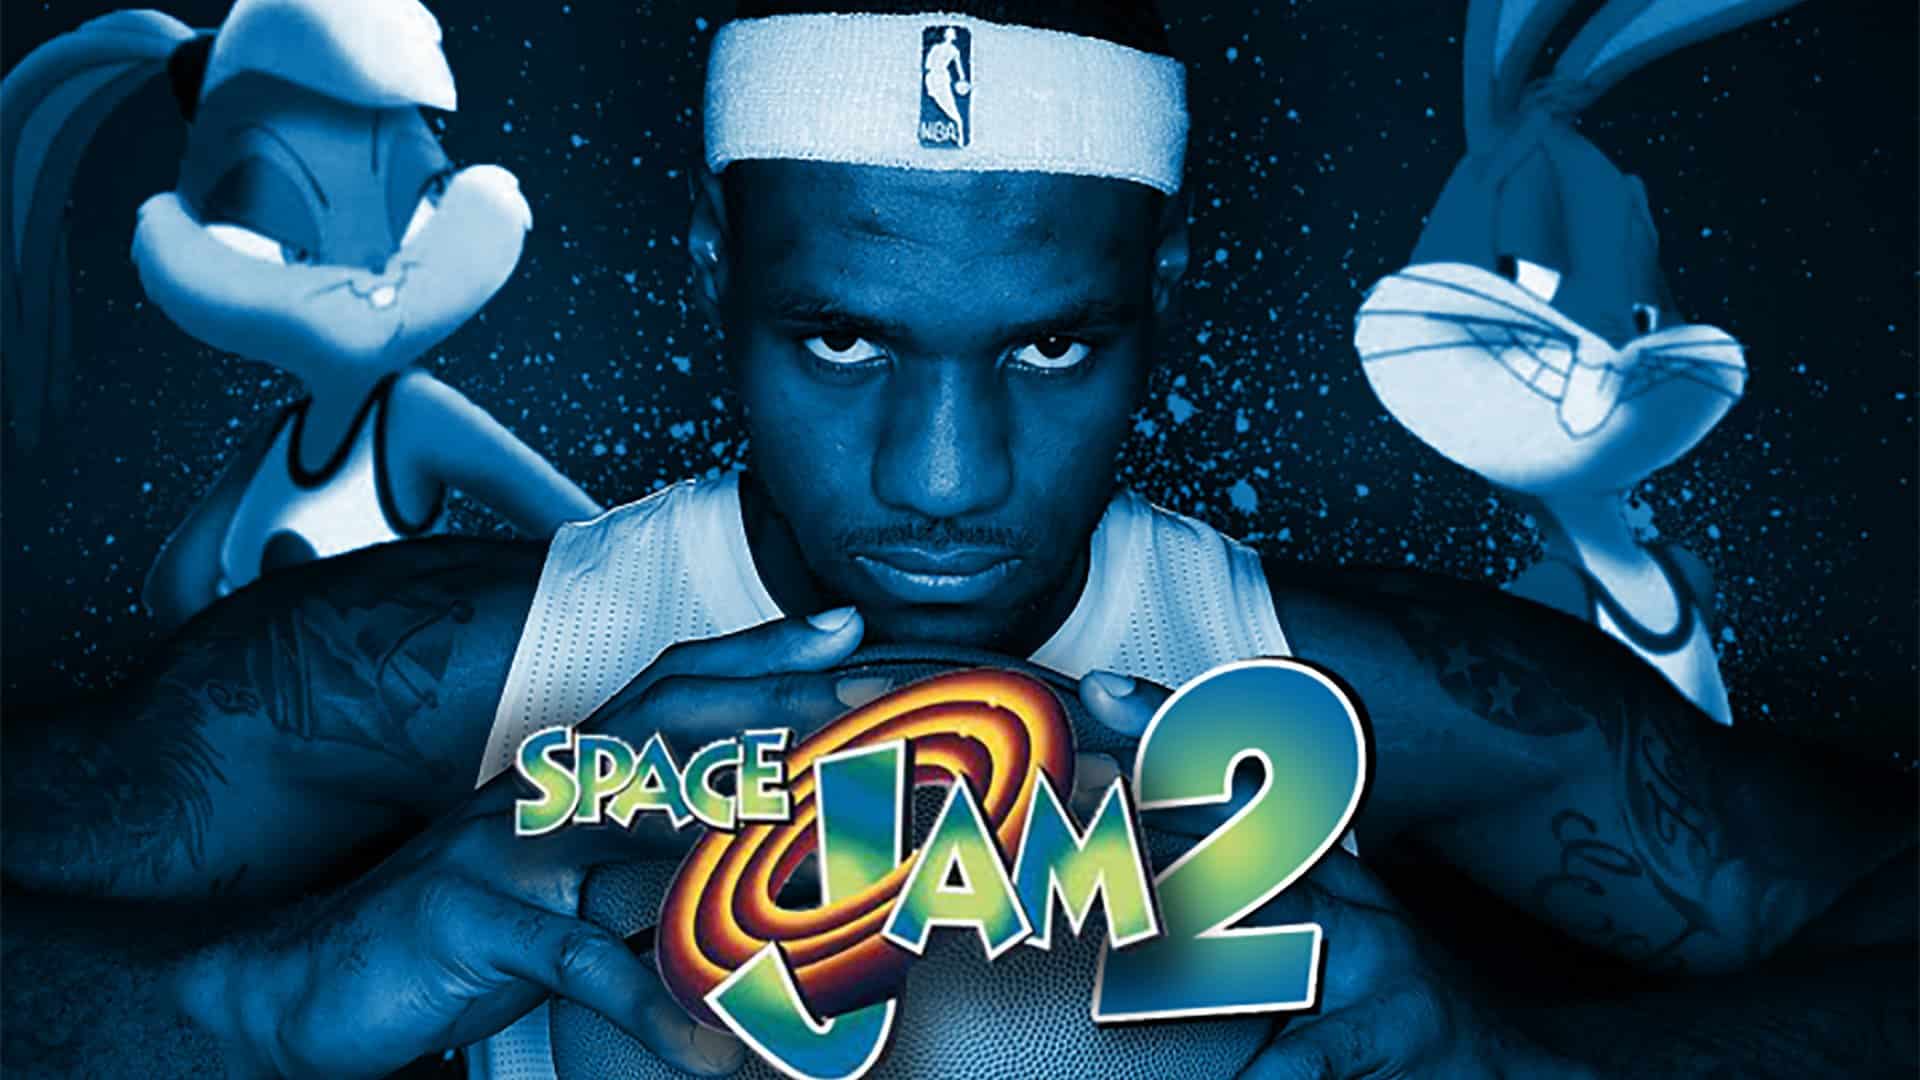 LeBron James will be the protagonist of Space Jam 2